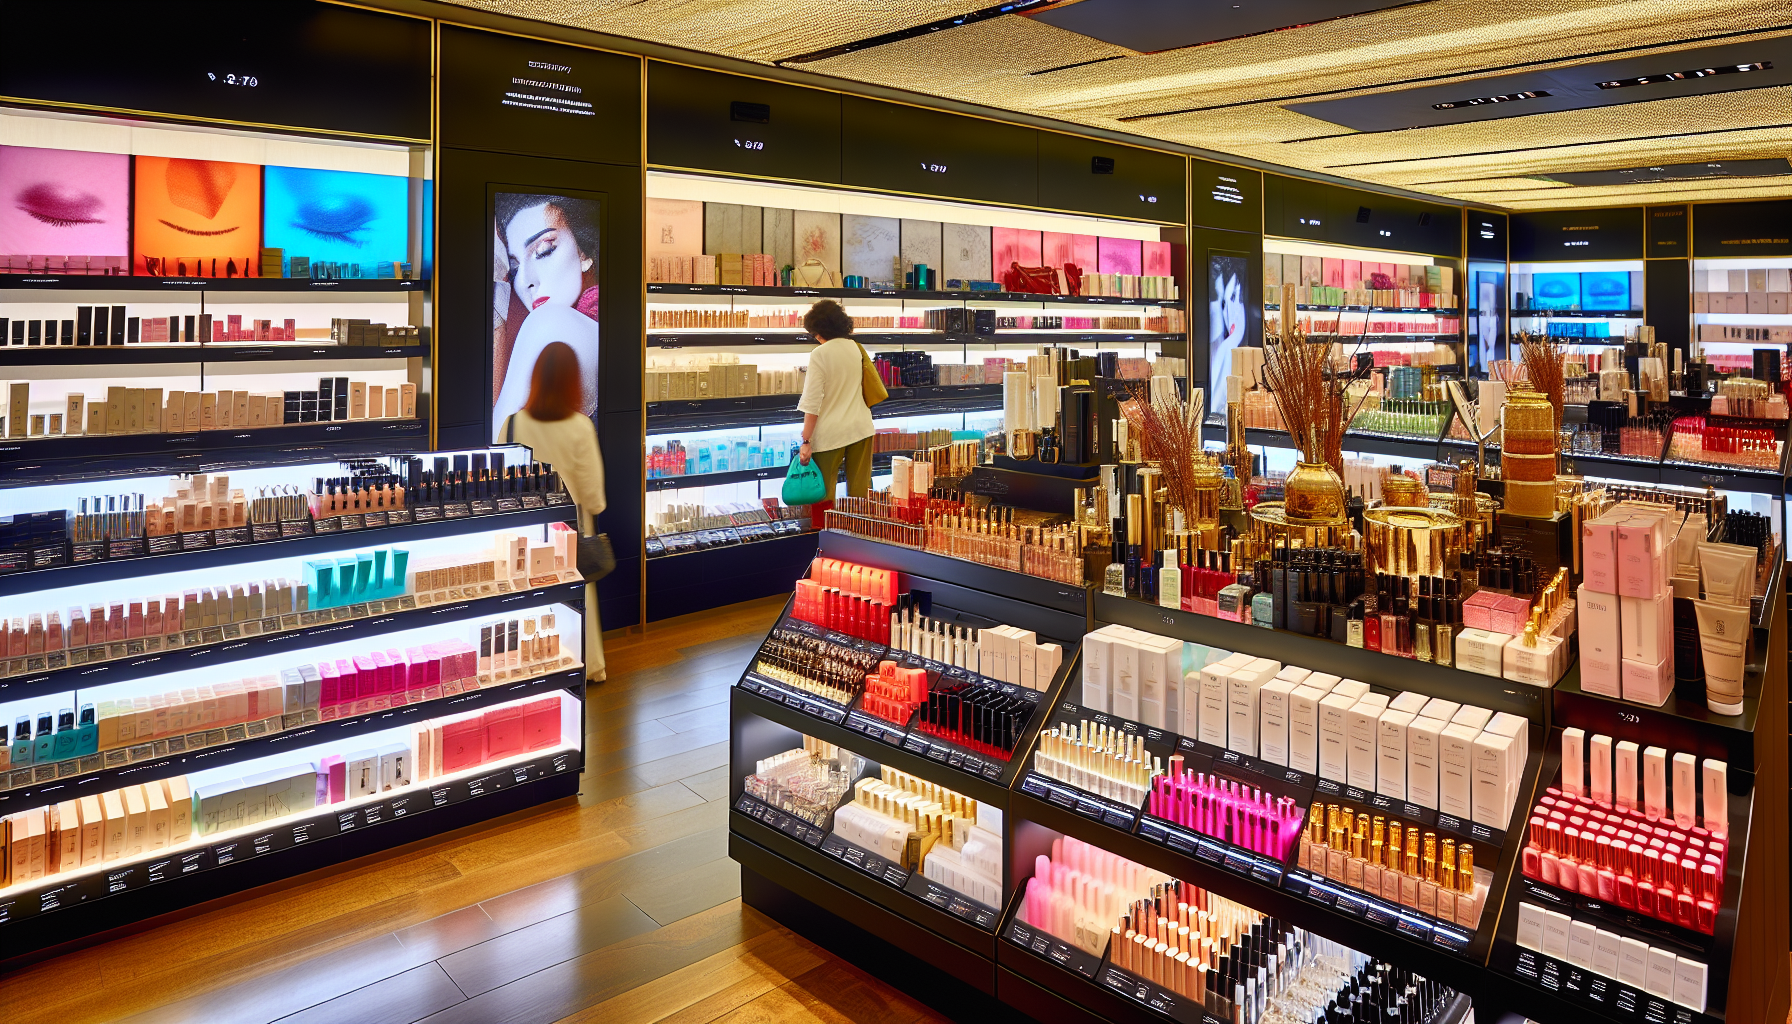 Sephora store interior with various beauty products on display